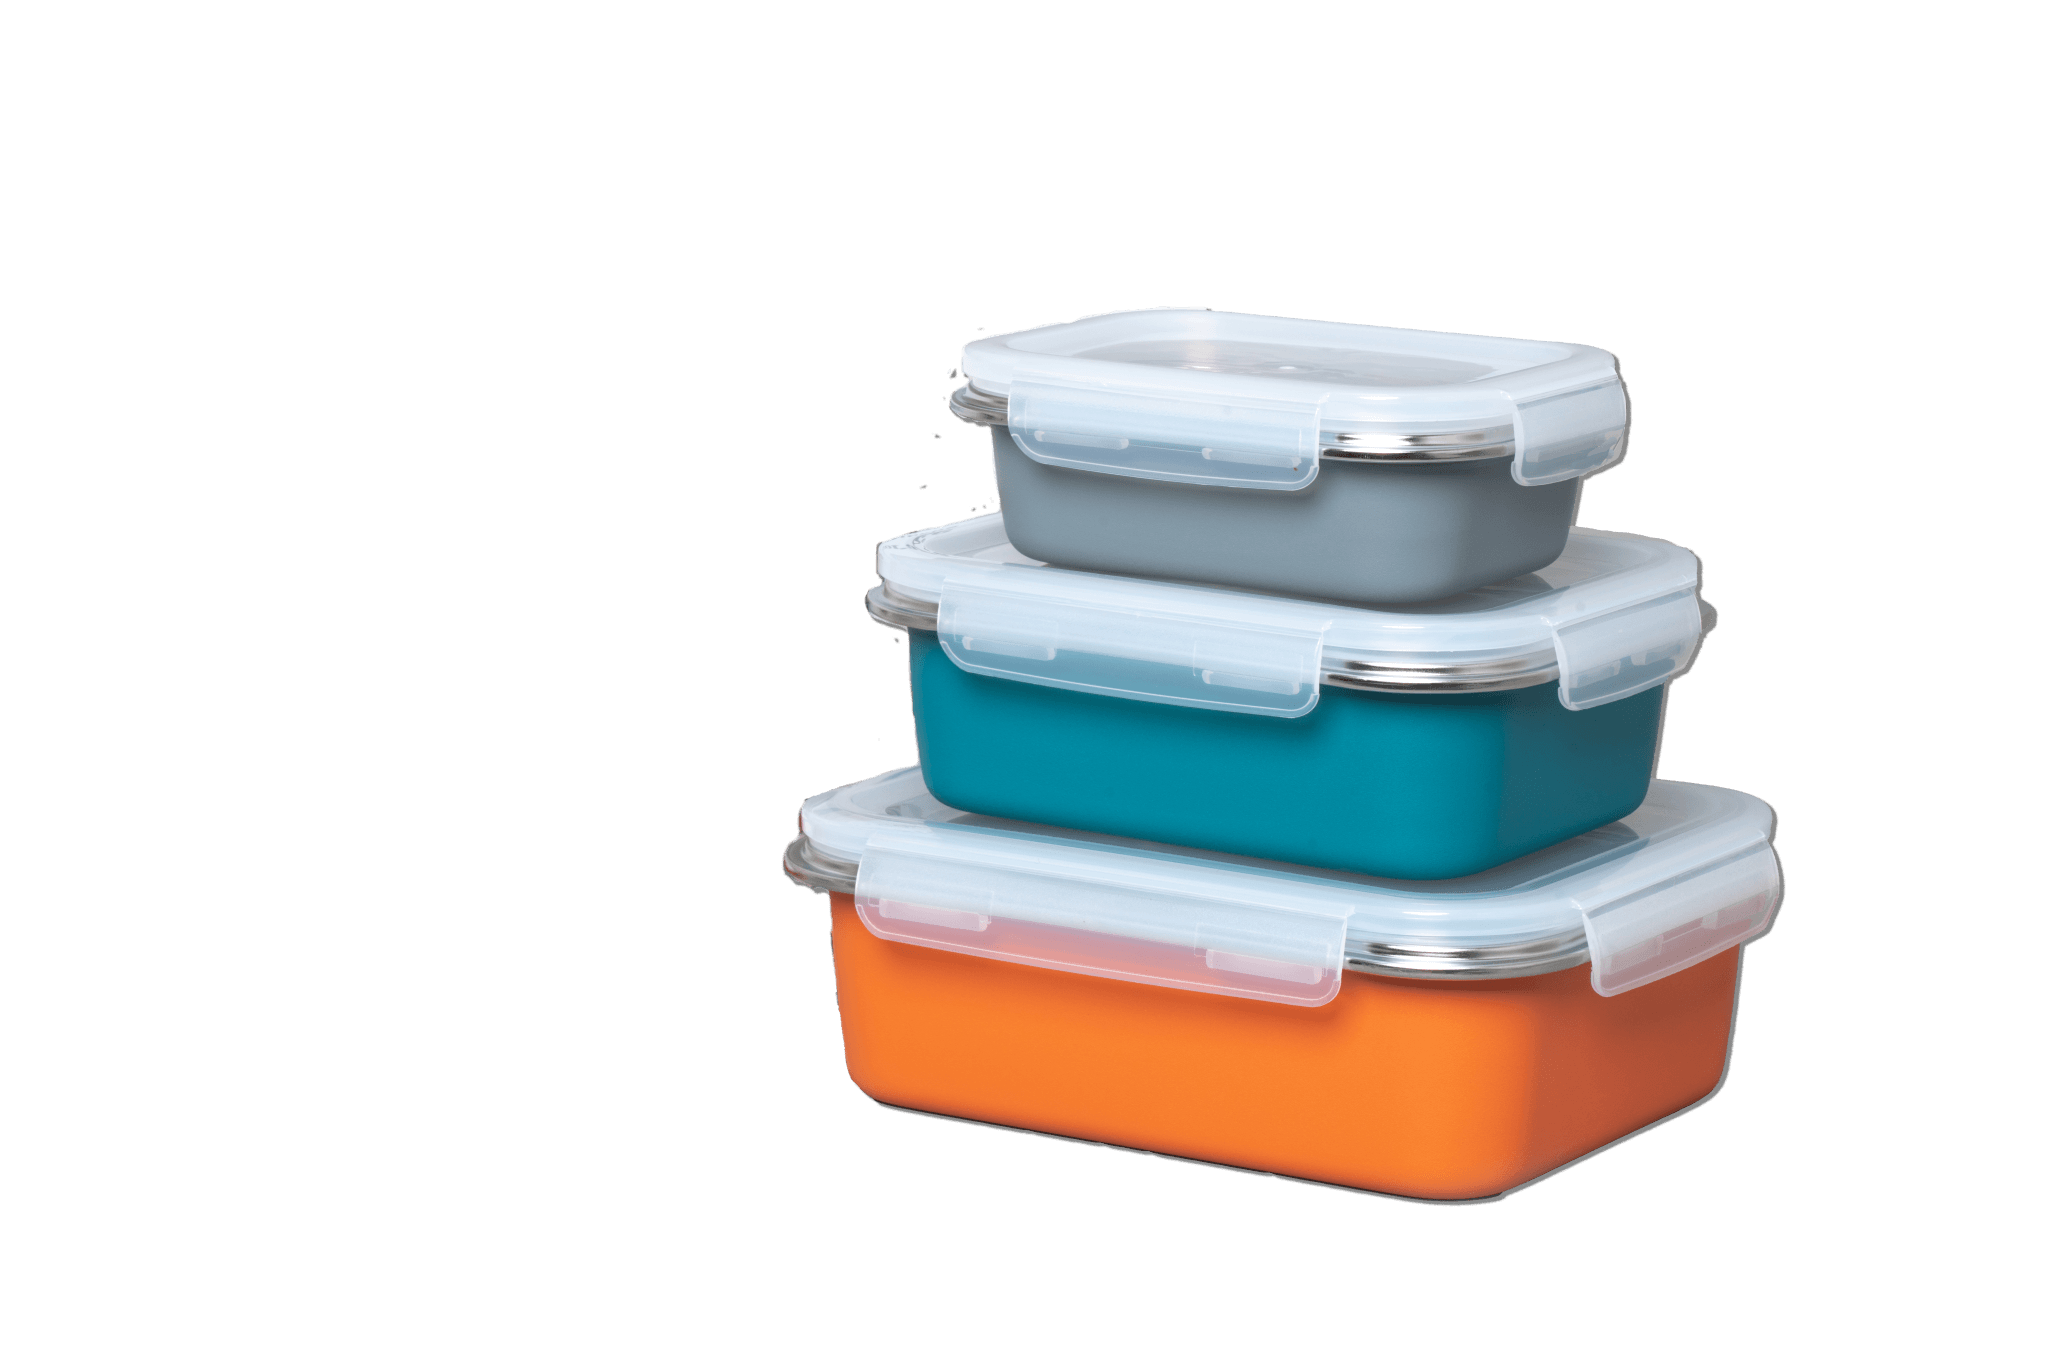 ikitchen Stainless Steel Food Containers with Lids, Set of 3 Small  Condiment Containers, Lunch Box f…See more ikitchen Stainless Steel Food  Containers